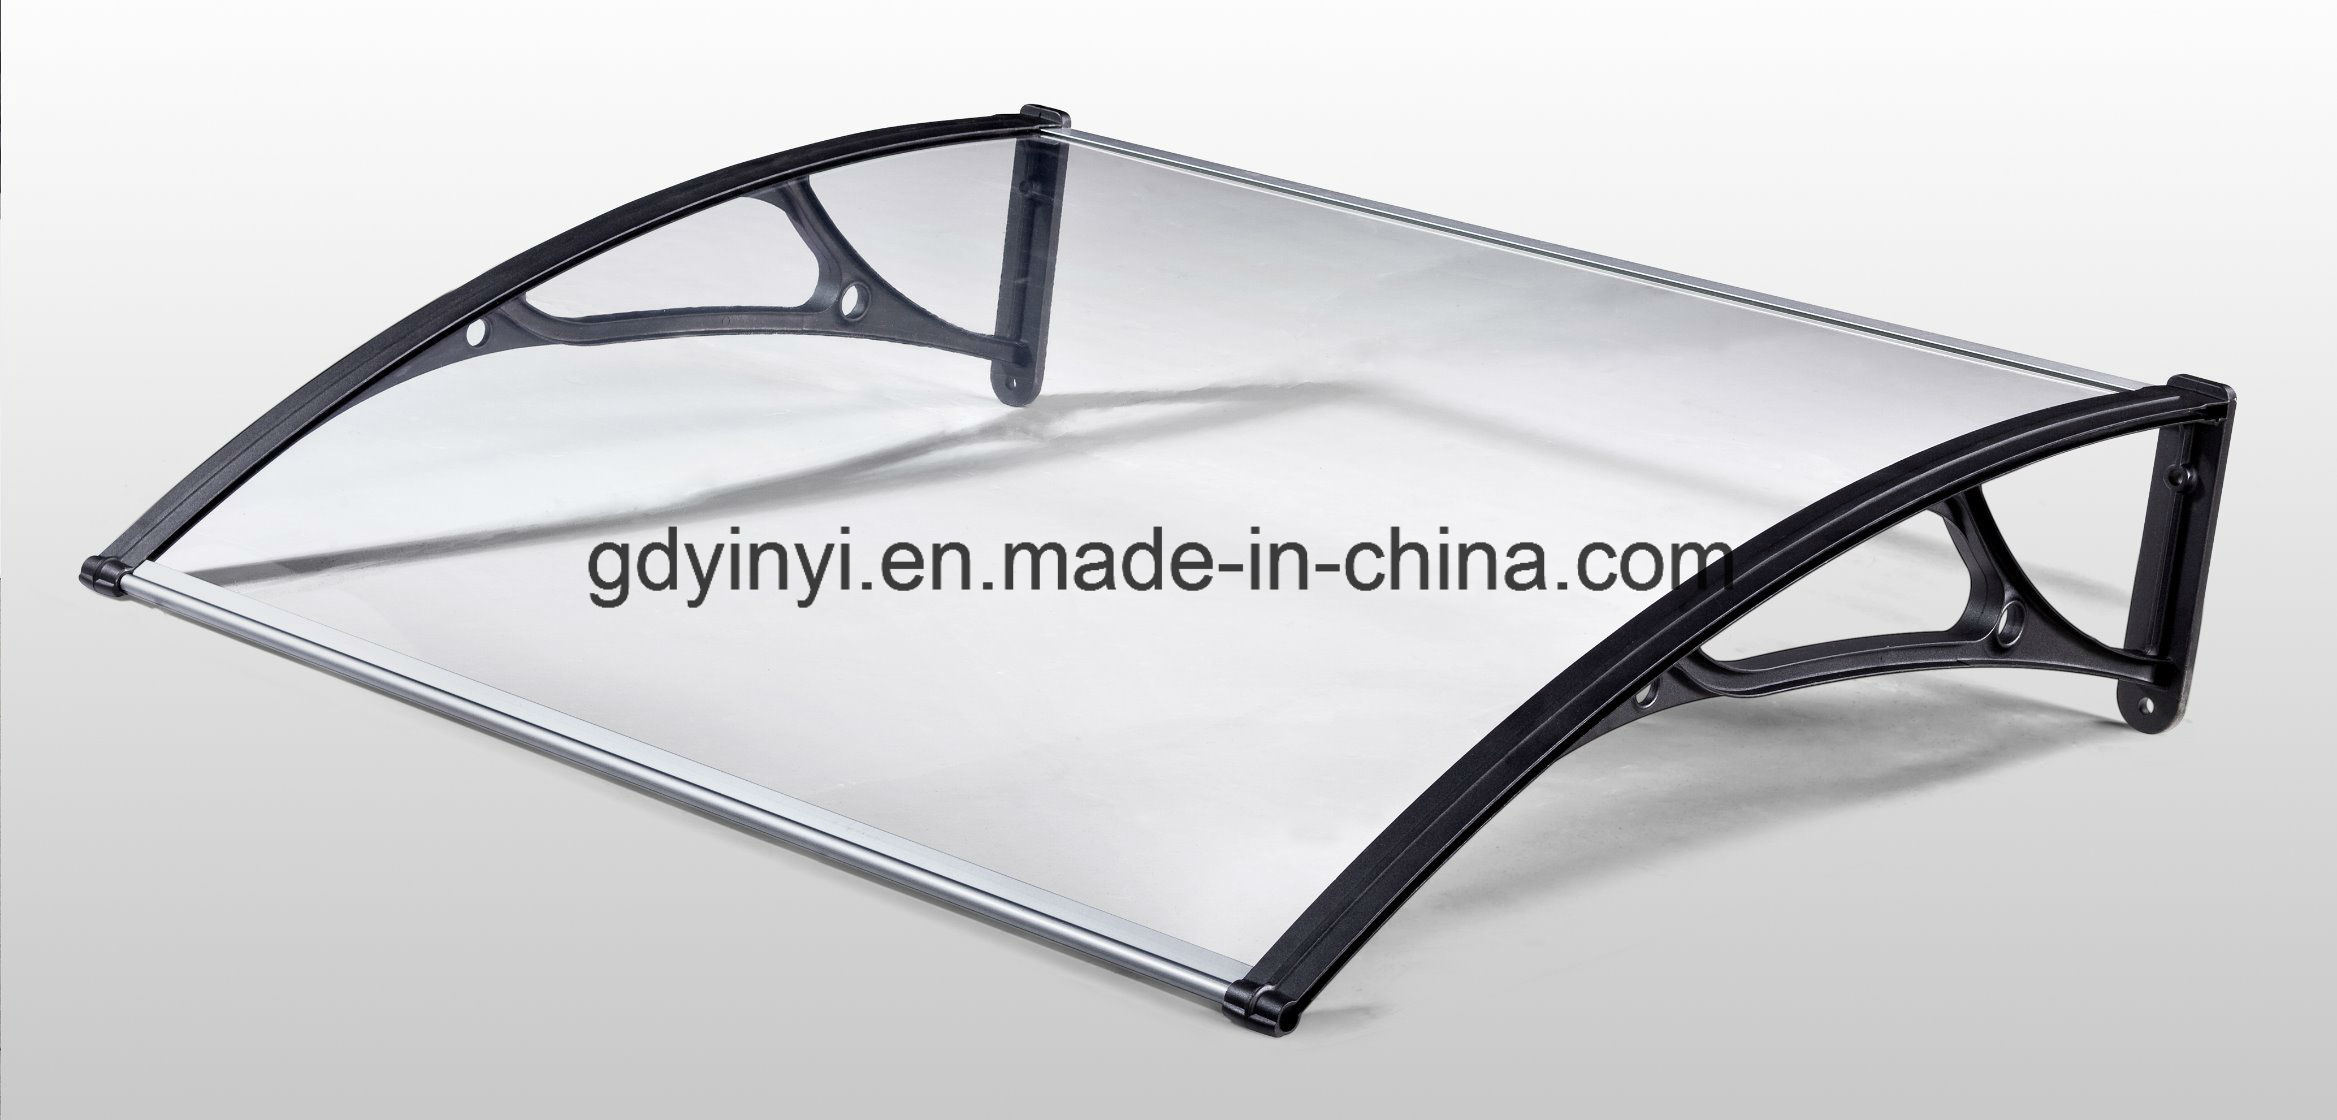 Outdoor Durable Clear Polycarbonate Awnings with Aluminium Brackets (YY1000-F)